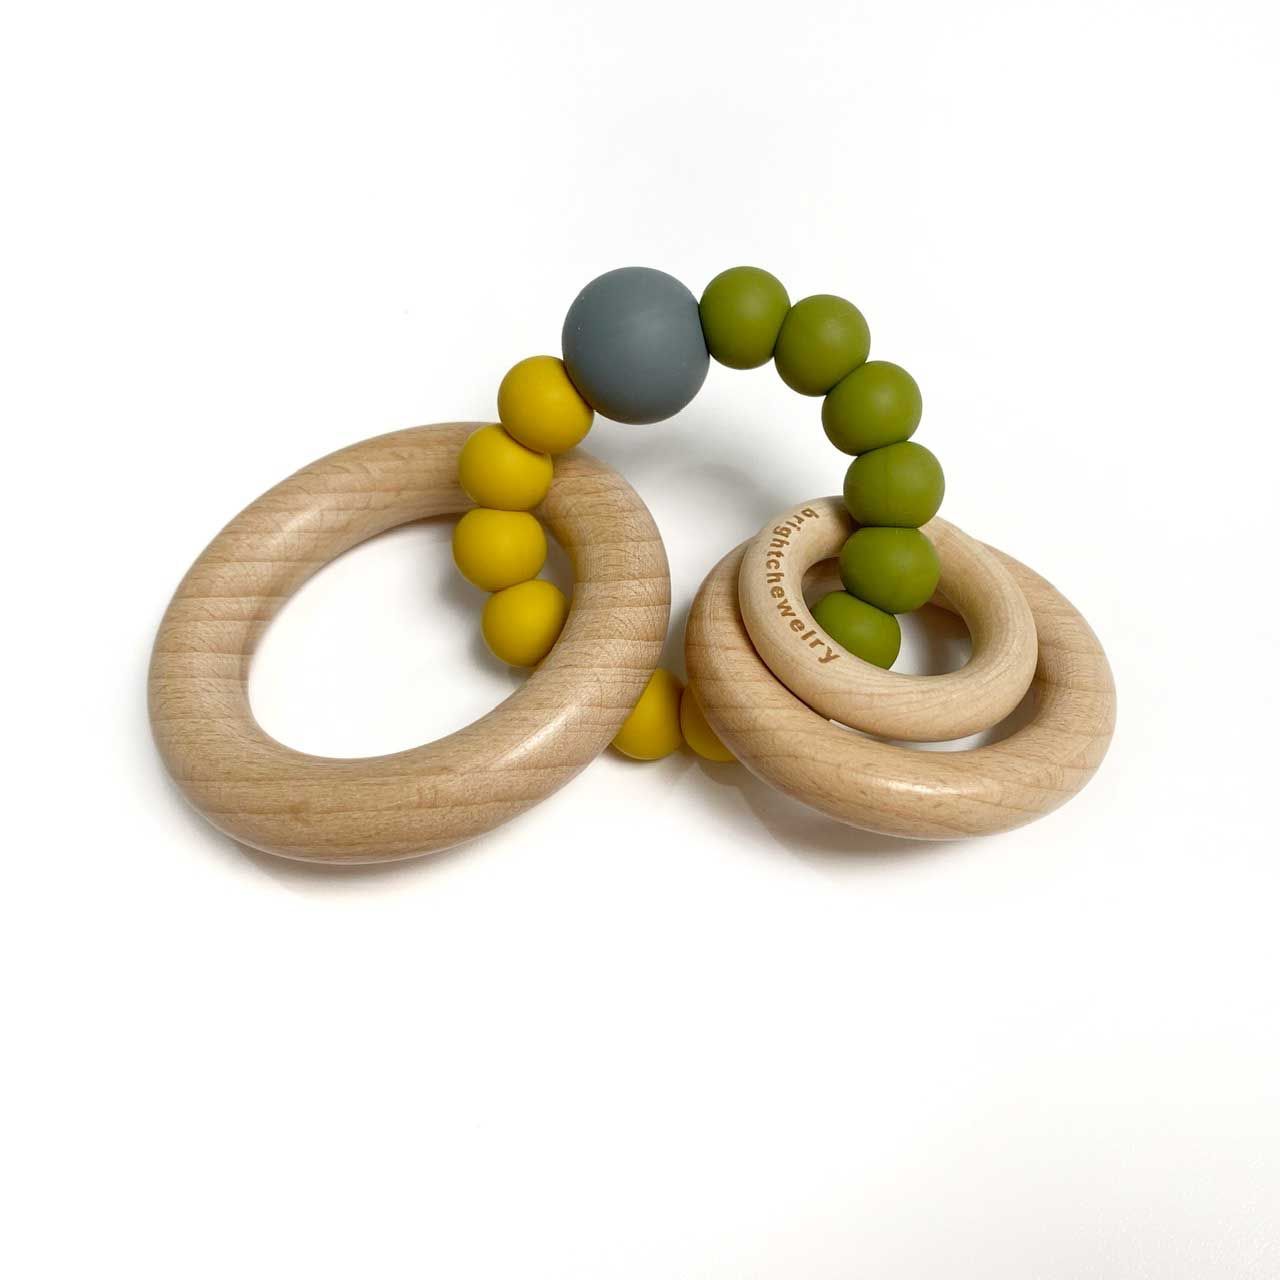 Brightchewelry Mixwooden Silicone Rattle-Earth Tone - 1